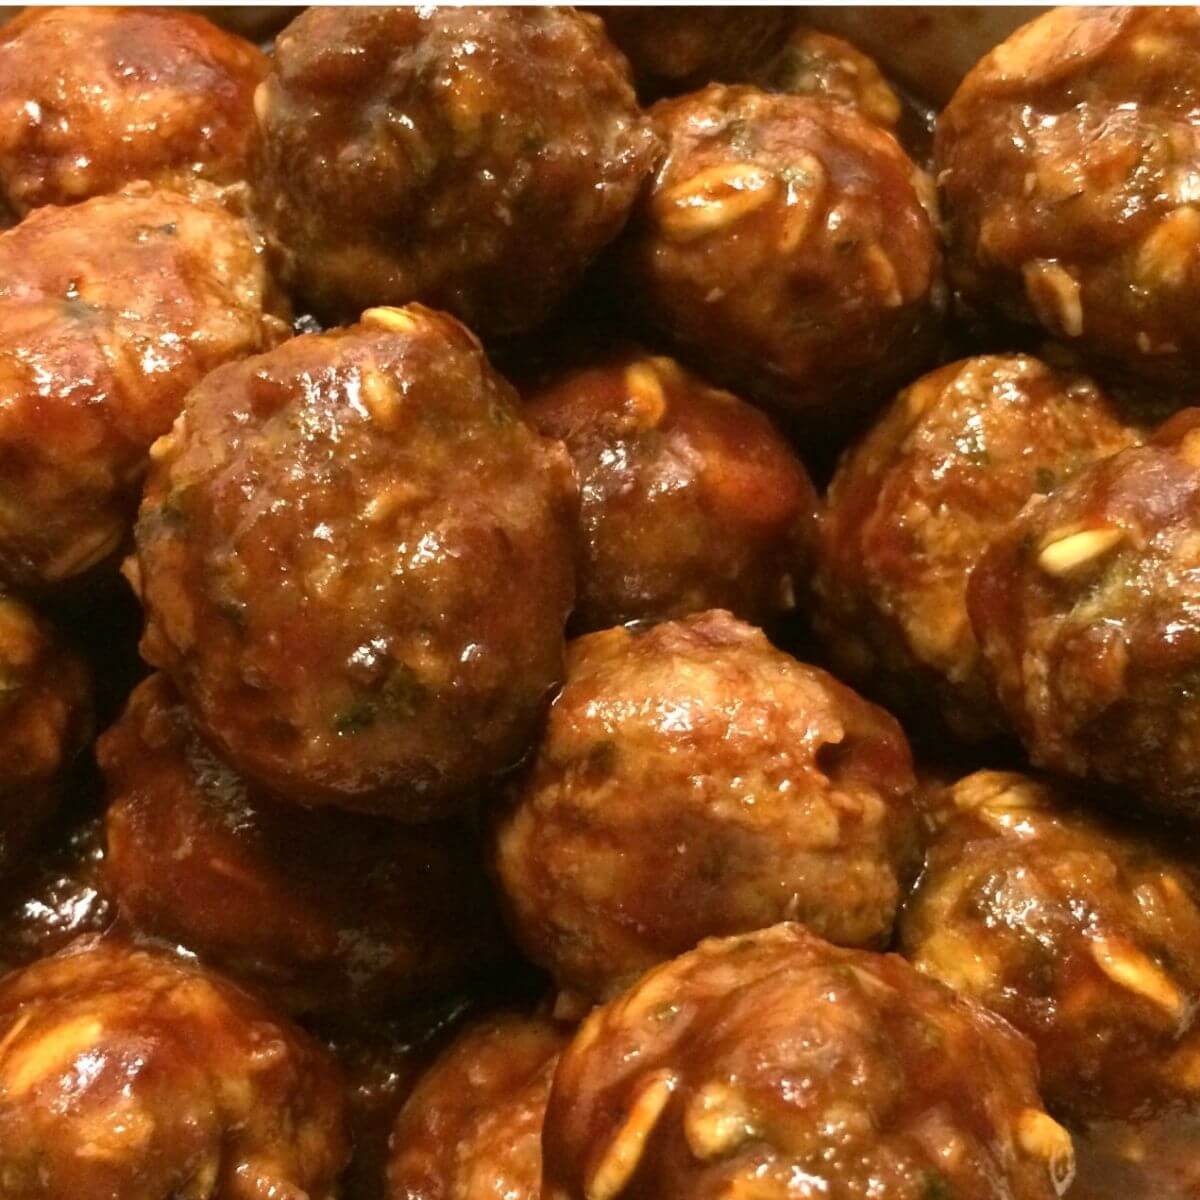 Complete cooked meatballs with barbecue sauce piled up, close up view.